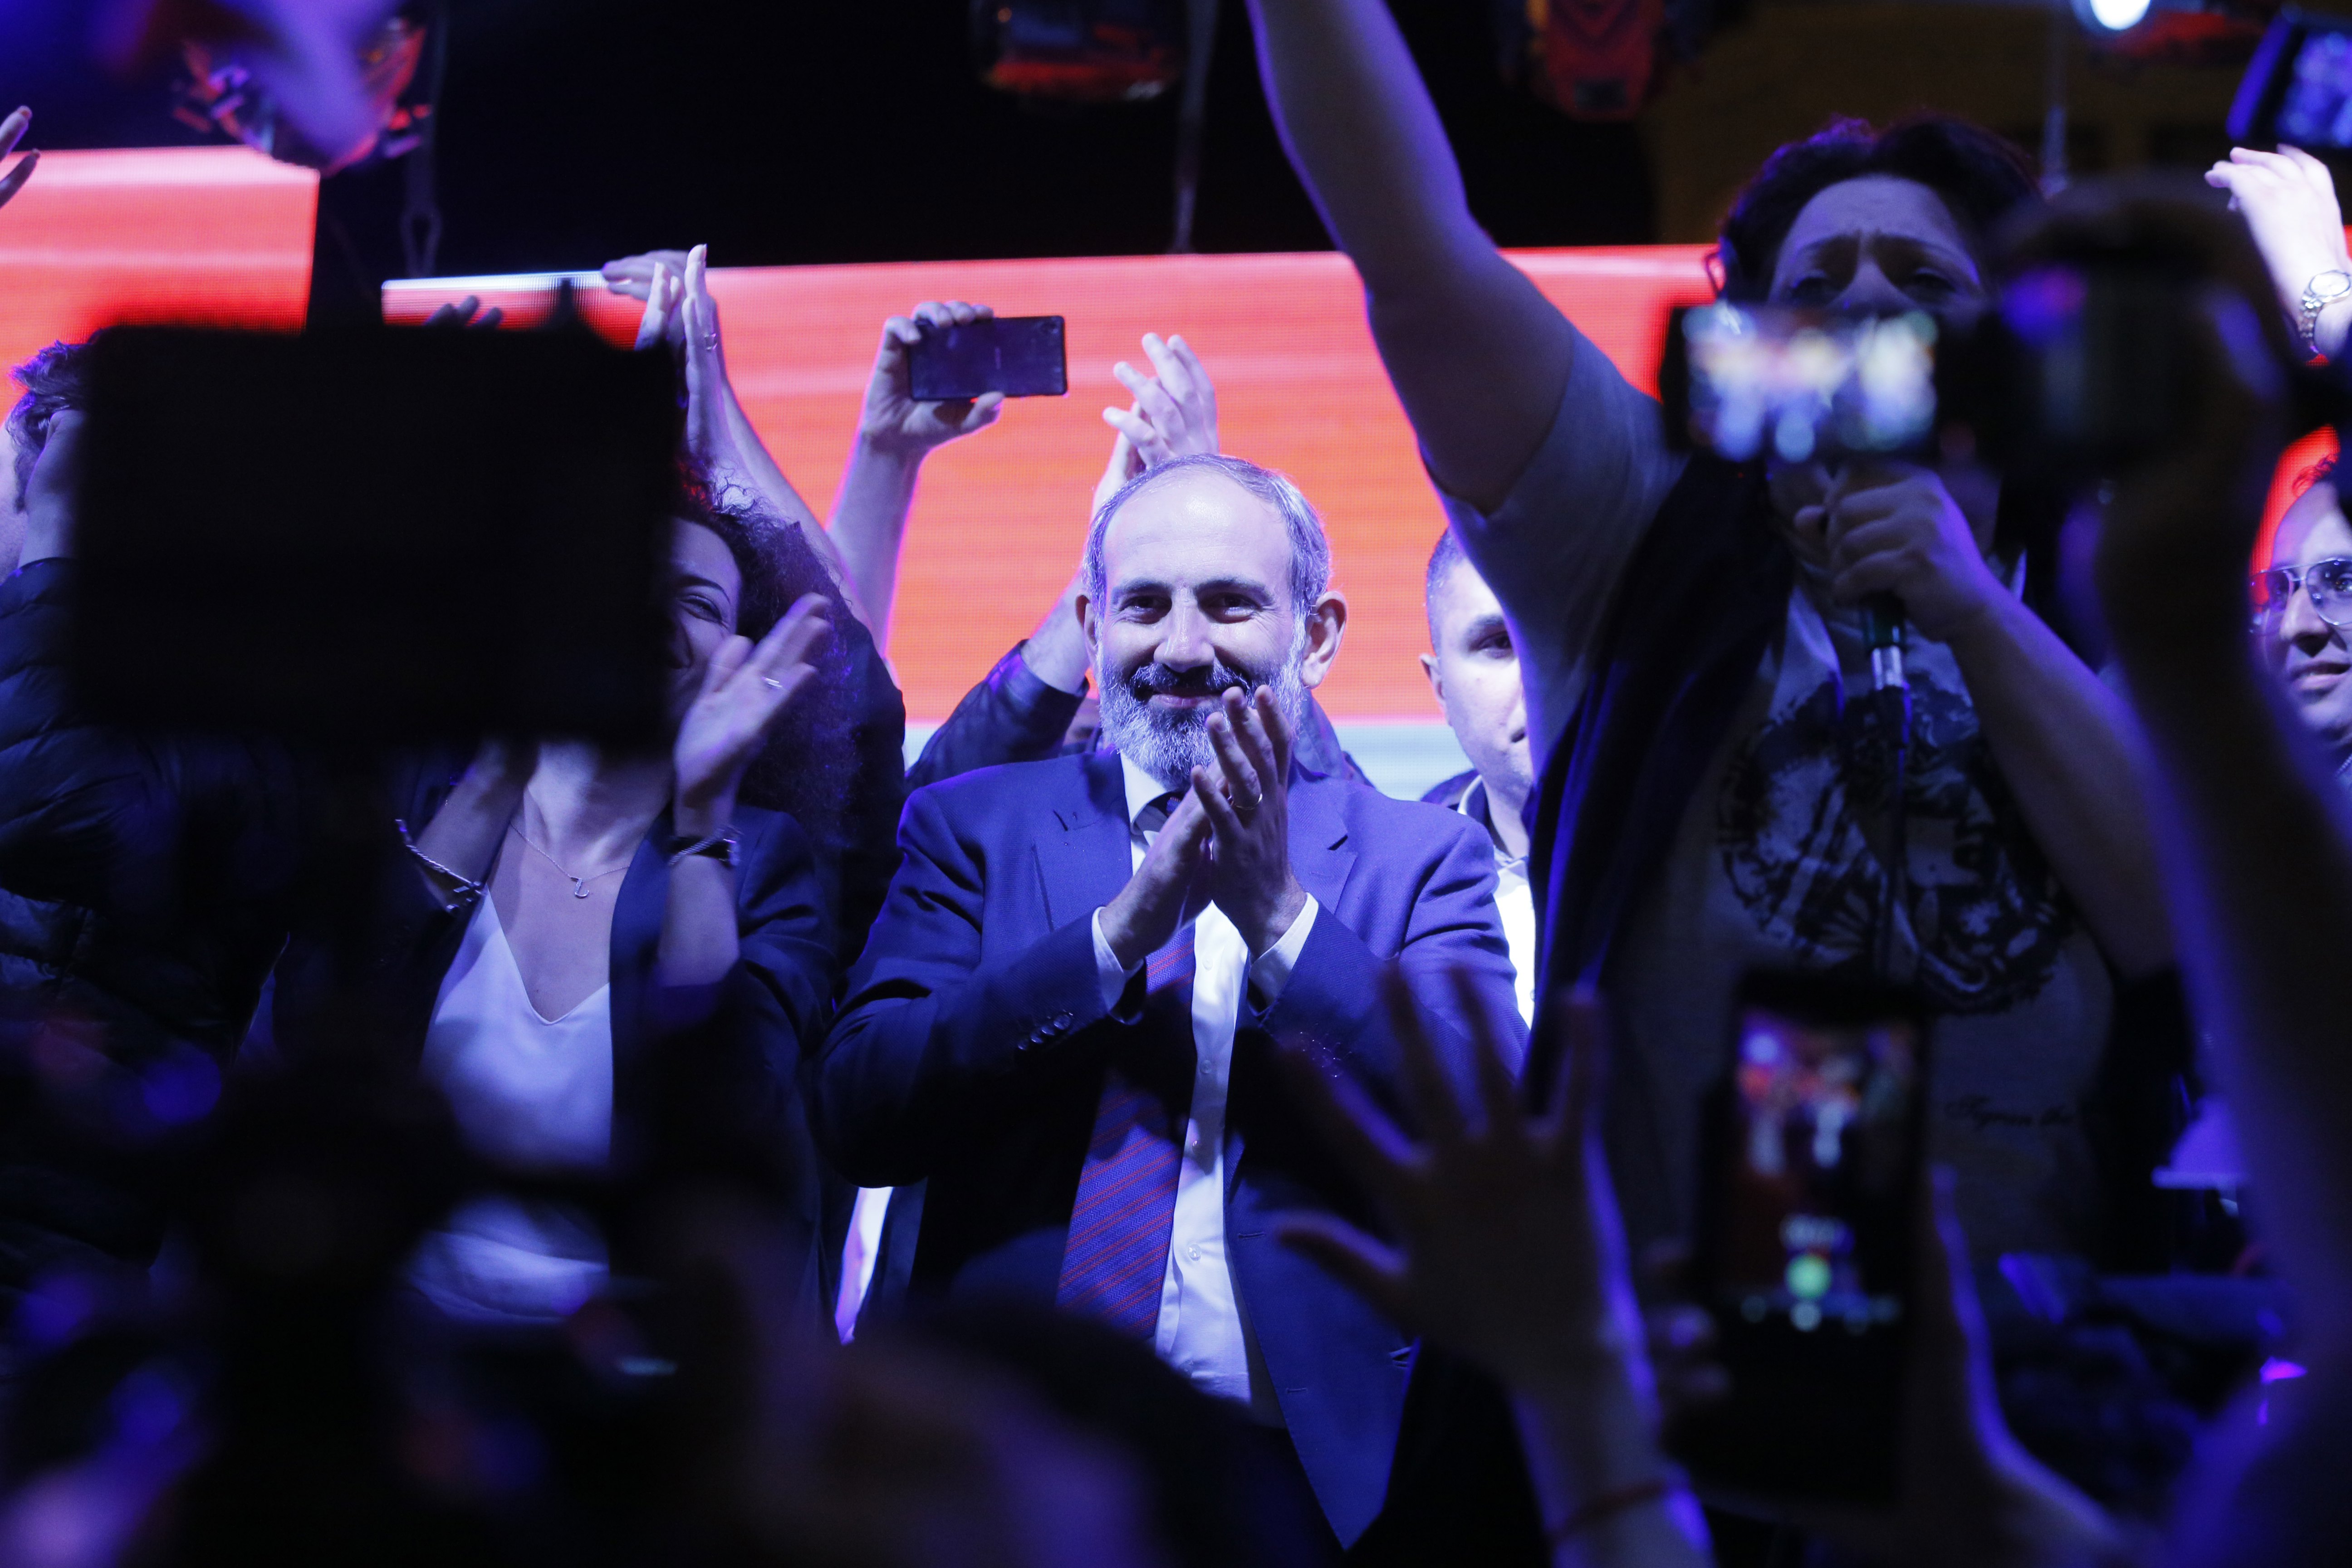 epa06705158 Armenian opposition leader and Armenian parliament member Nikol Pashinyan addresses supporters at an opposition rally in Yerevan, Armenia, 01 May 2018. Opposition supporters demand that the acting prime minister, a representative of the ruling Republican Party of Armenia, be replaced by a people's candidate before early parliamentary elections take place.  EPA/ZURAB KURTSIKIDZE